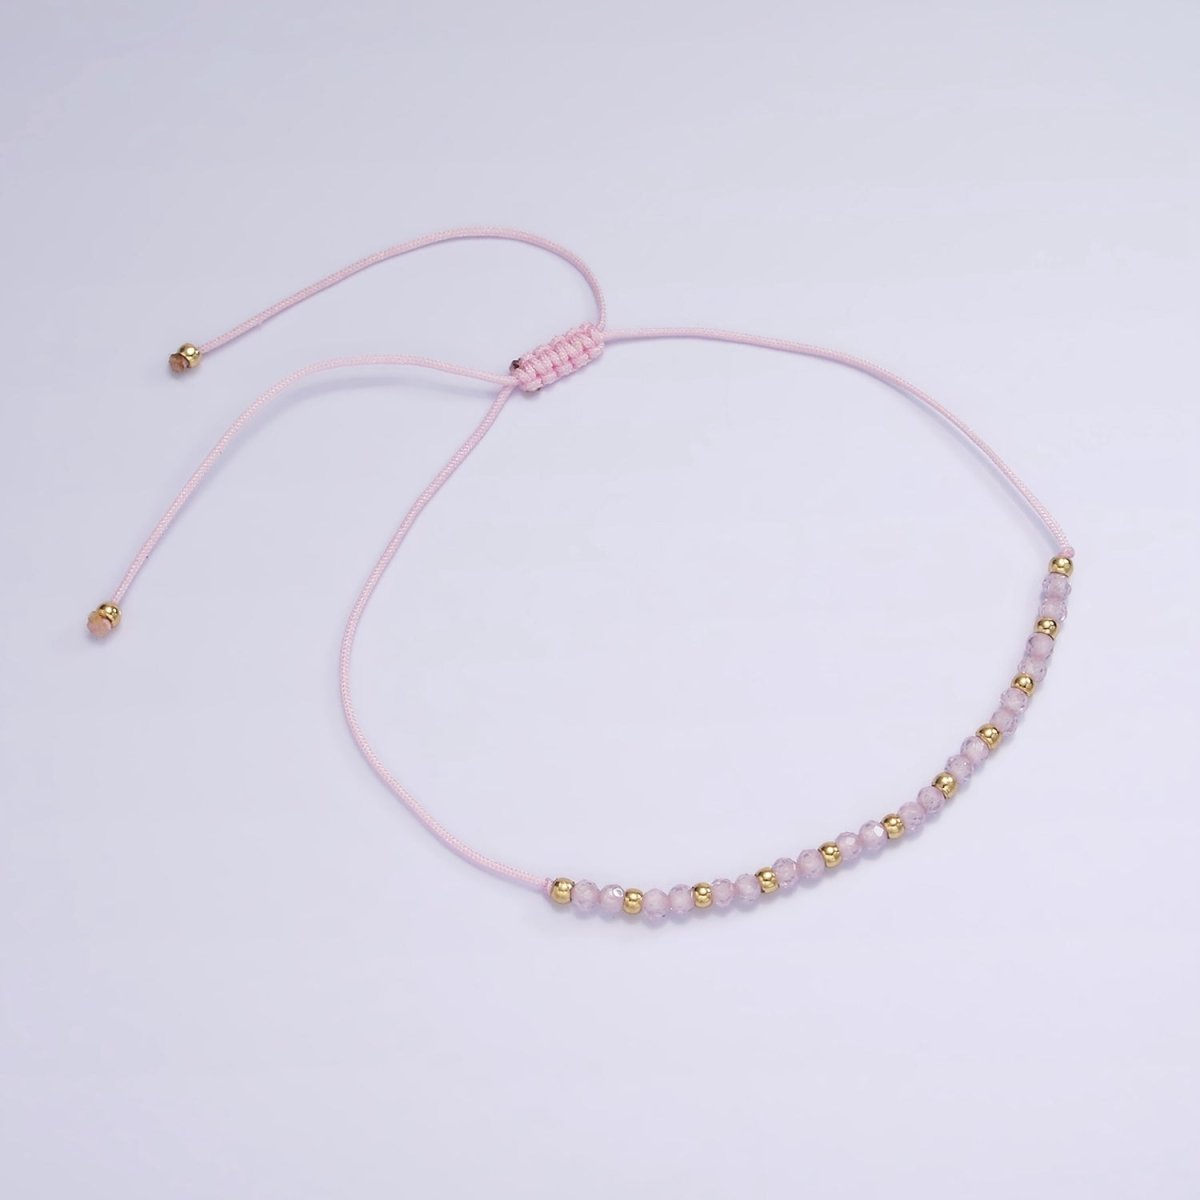 Pink Friendship Bracelet Rope Cord Adjustable Bracelet For Women with Gold Beads | WA-2212 - WA-2214 Clearance Pricing - DLUXCA